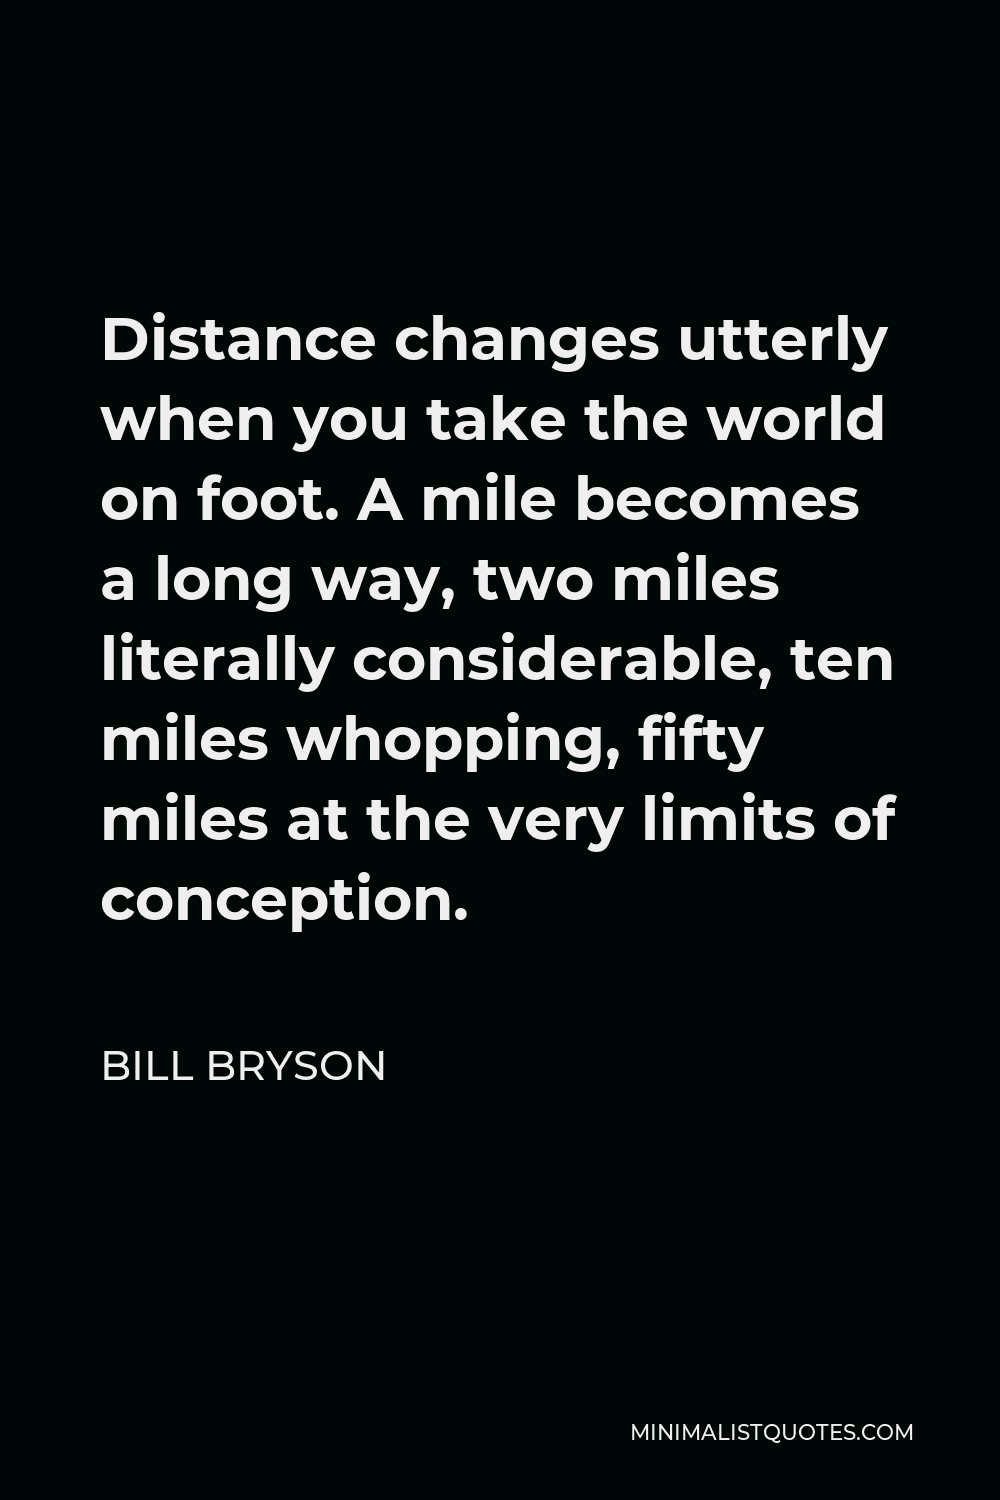 Bill Bryson Quote - Distance changes utterly when you take the world on foot. A mile becomes a long way, two miles literally considerable, ten miles whopping, fifty miles at the very limits of conception.